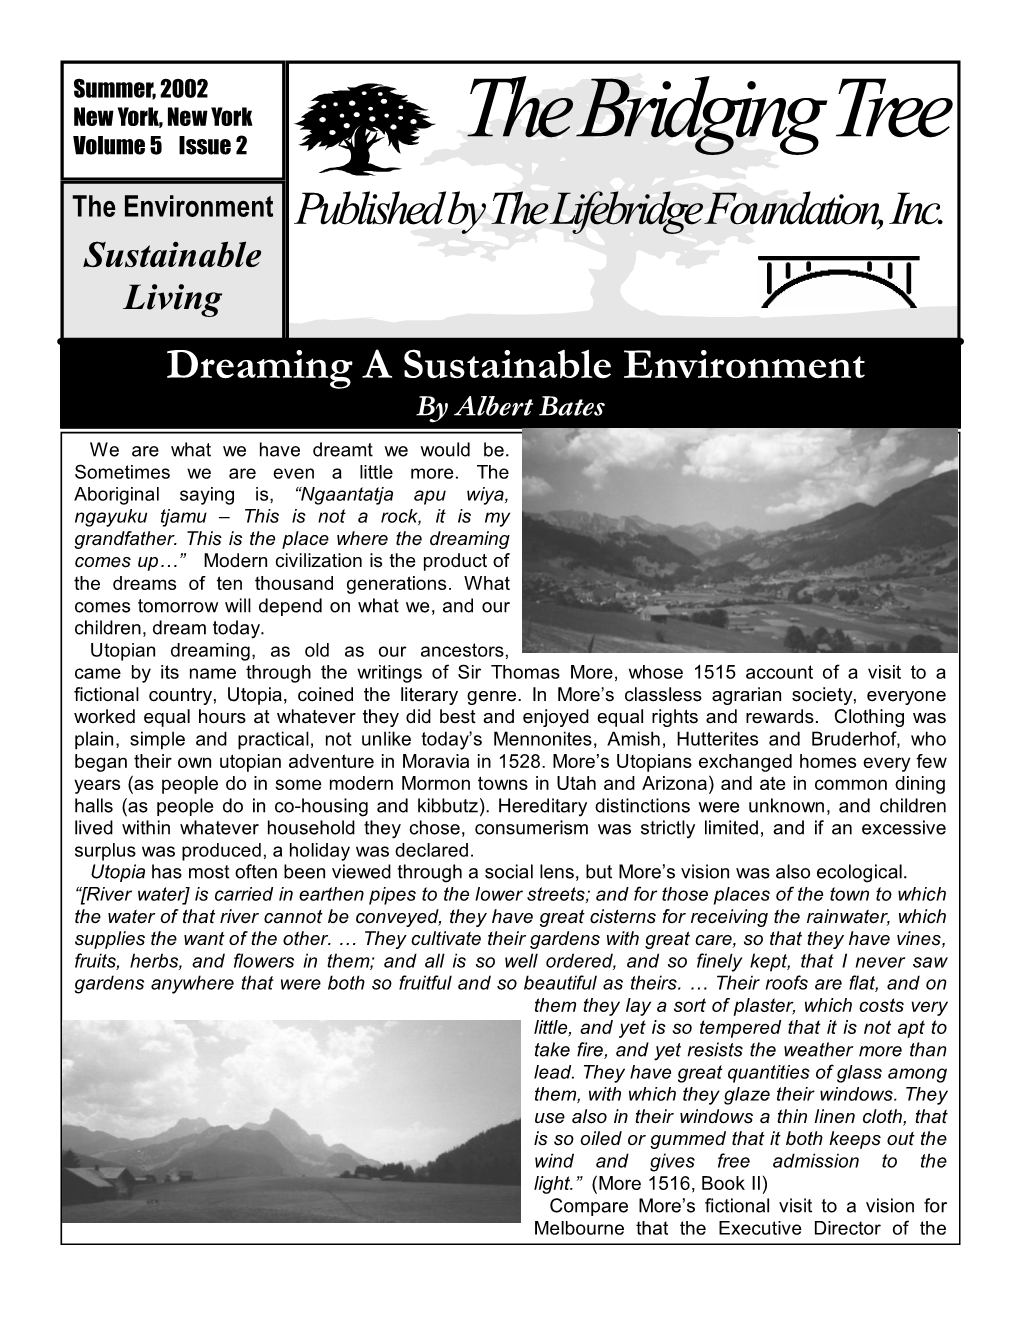 The Bridging Tree the Environment Published by the Lifebridgefoundation, Inc